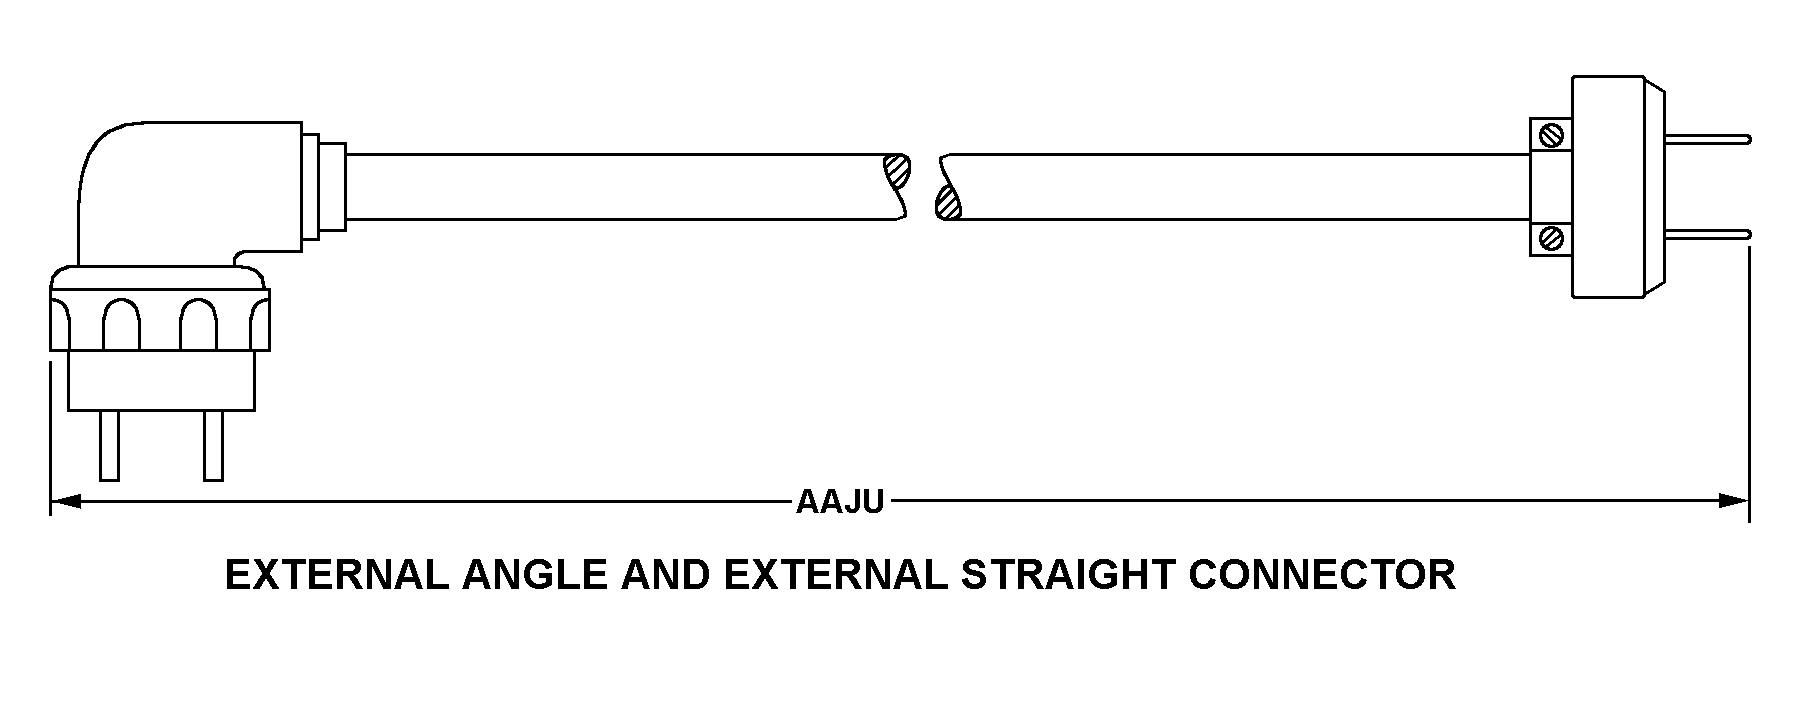 EXTERNAL ANGLE AND EXTERNAL STRAIGHT CONNECTOR style nsn 6150-01-535-2013